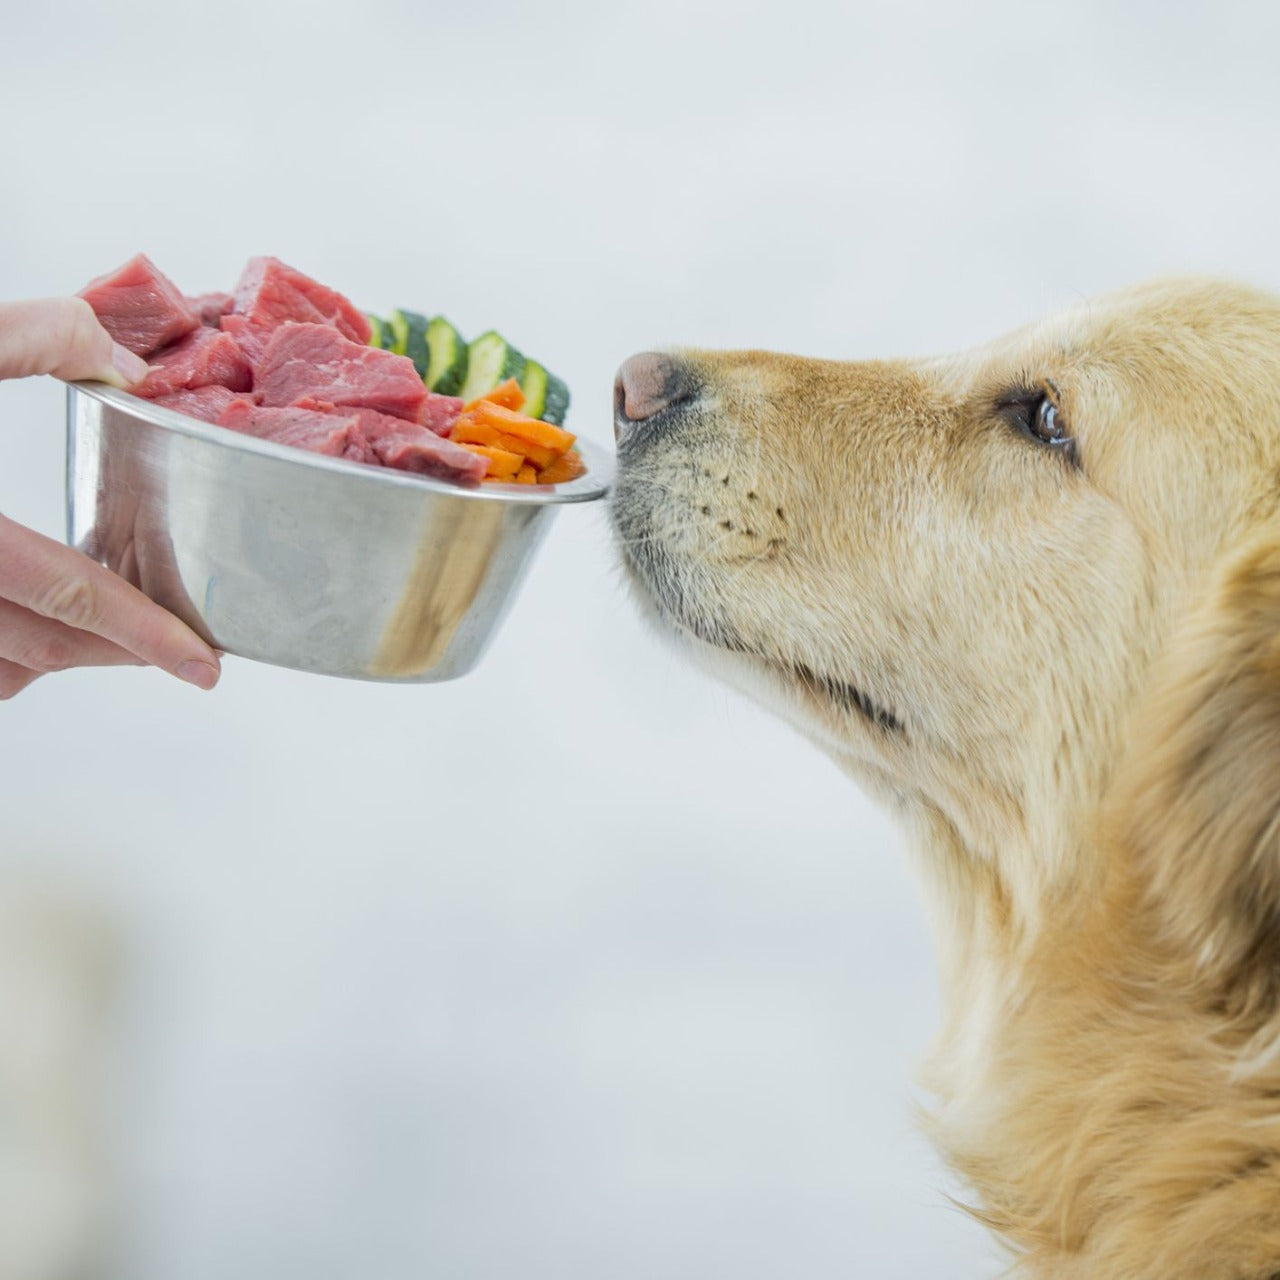 which cooked vegetables are good for dogs